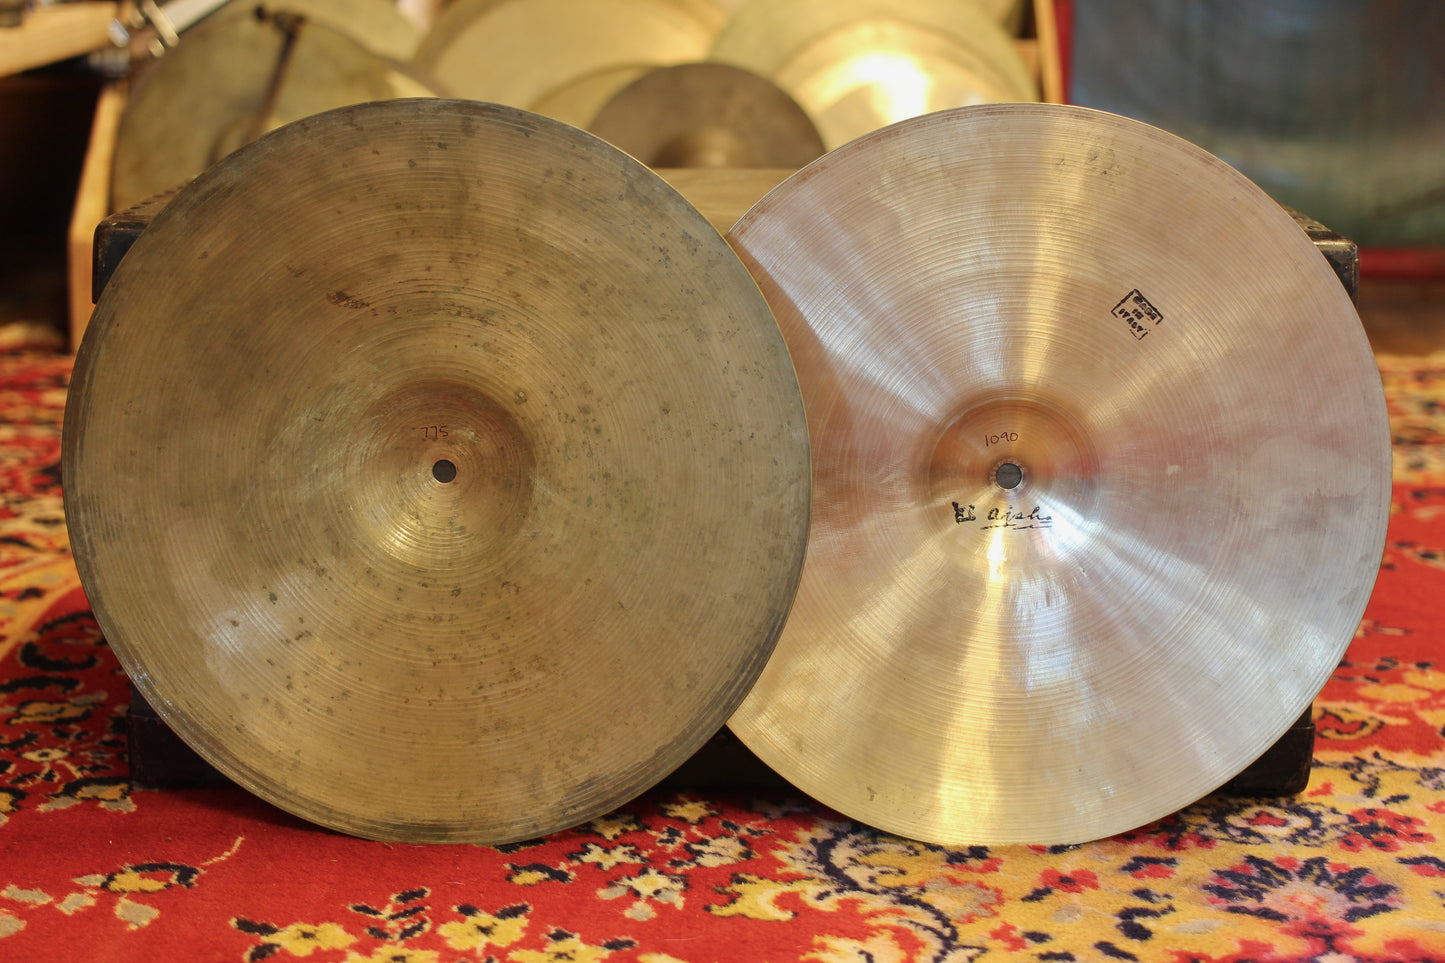 1960s Pre-UFIP "Made-In-Italy" 14" Hi-Hat Cymbals 775/1090g